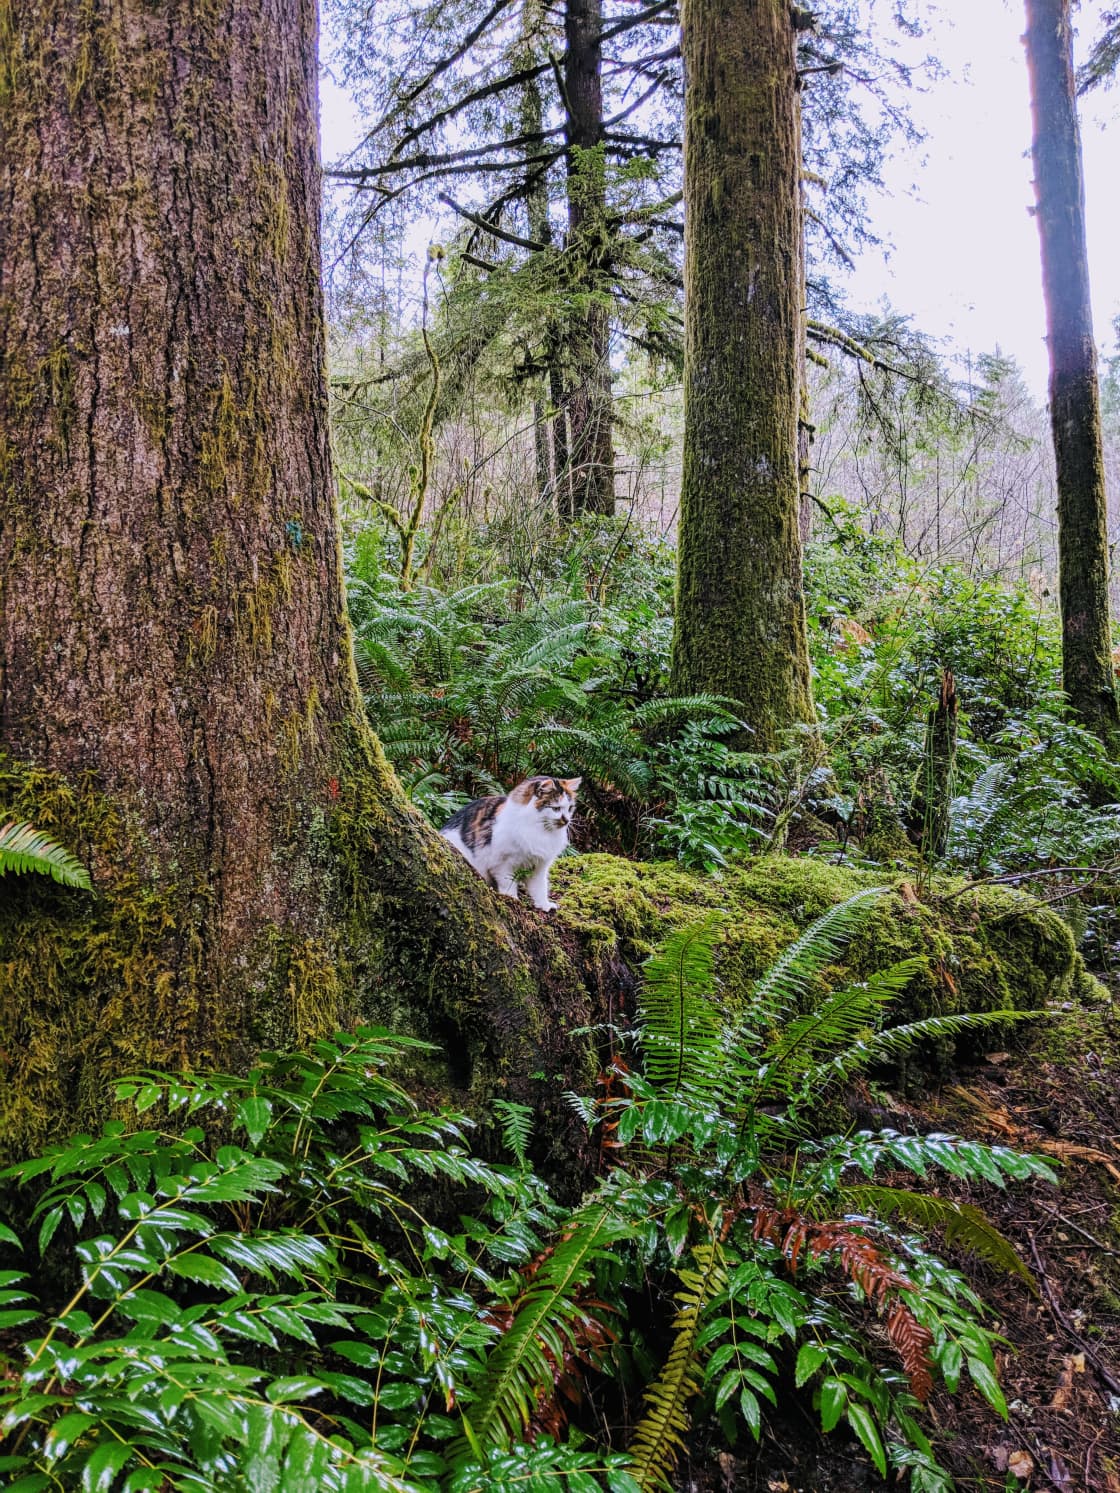 Our sweet little cat enjoys are afternoon walks at Nature Camp.